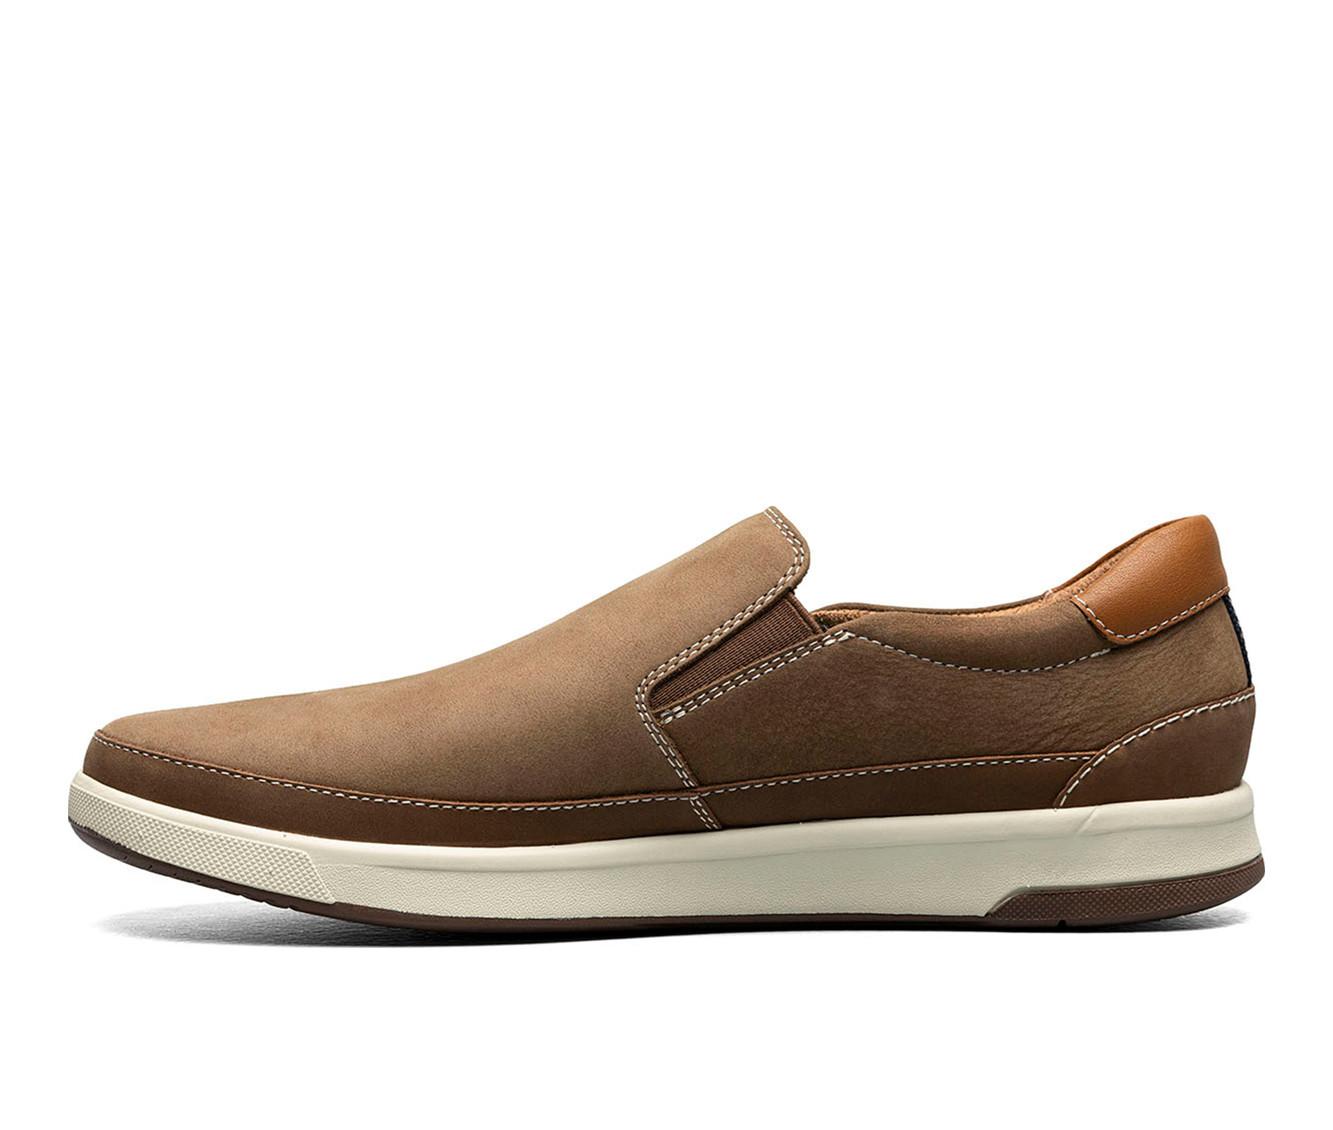 Men's Florsheim Crossover Double Gore Slip On Casual Loafers